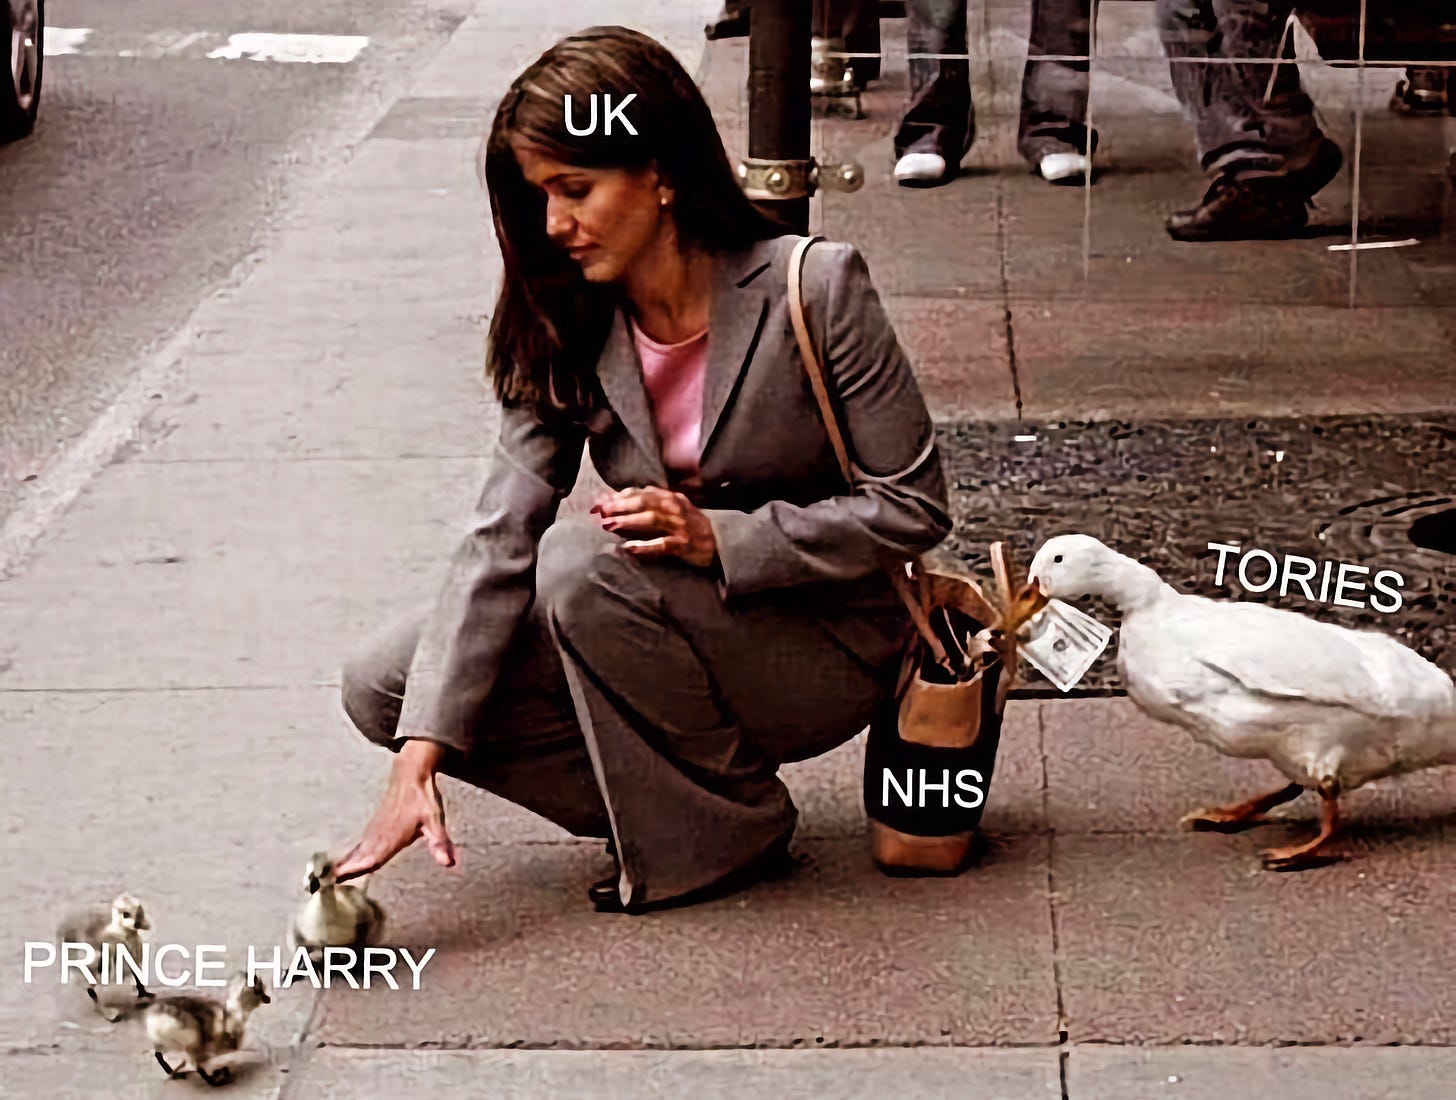 The lady is crouching with the label on her head 'UK'. She is stroking some ducklings with the label 'Prince Harry' while behind her a cheeky goose marked. Tories is stealing money from her handbag marked 'NHS'